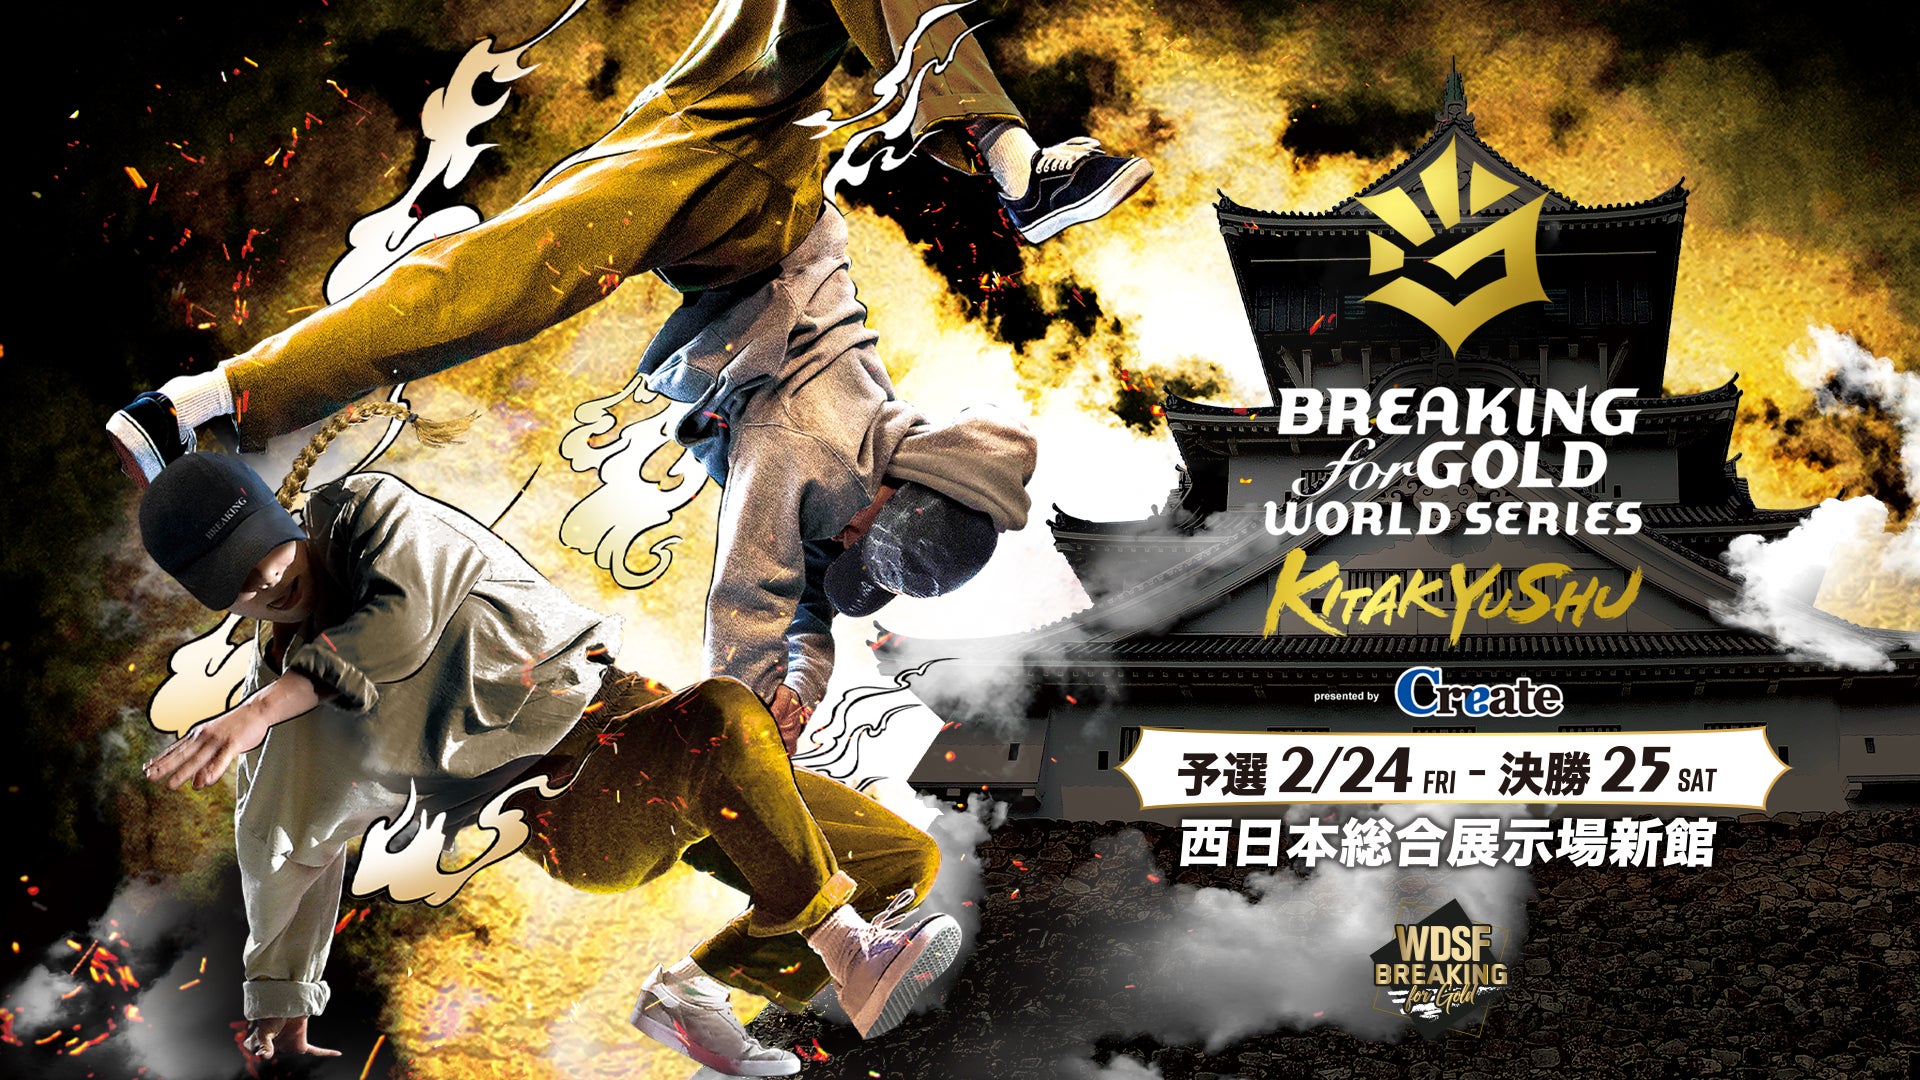 WDSF Breaking for Gold World Series in北九州 presented by Create